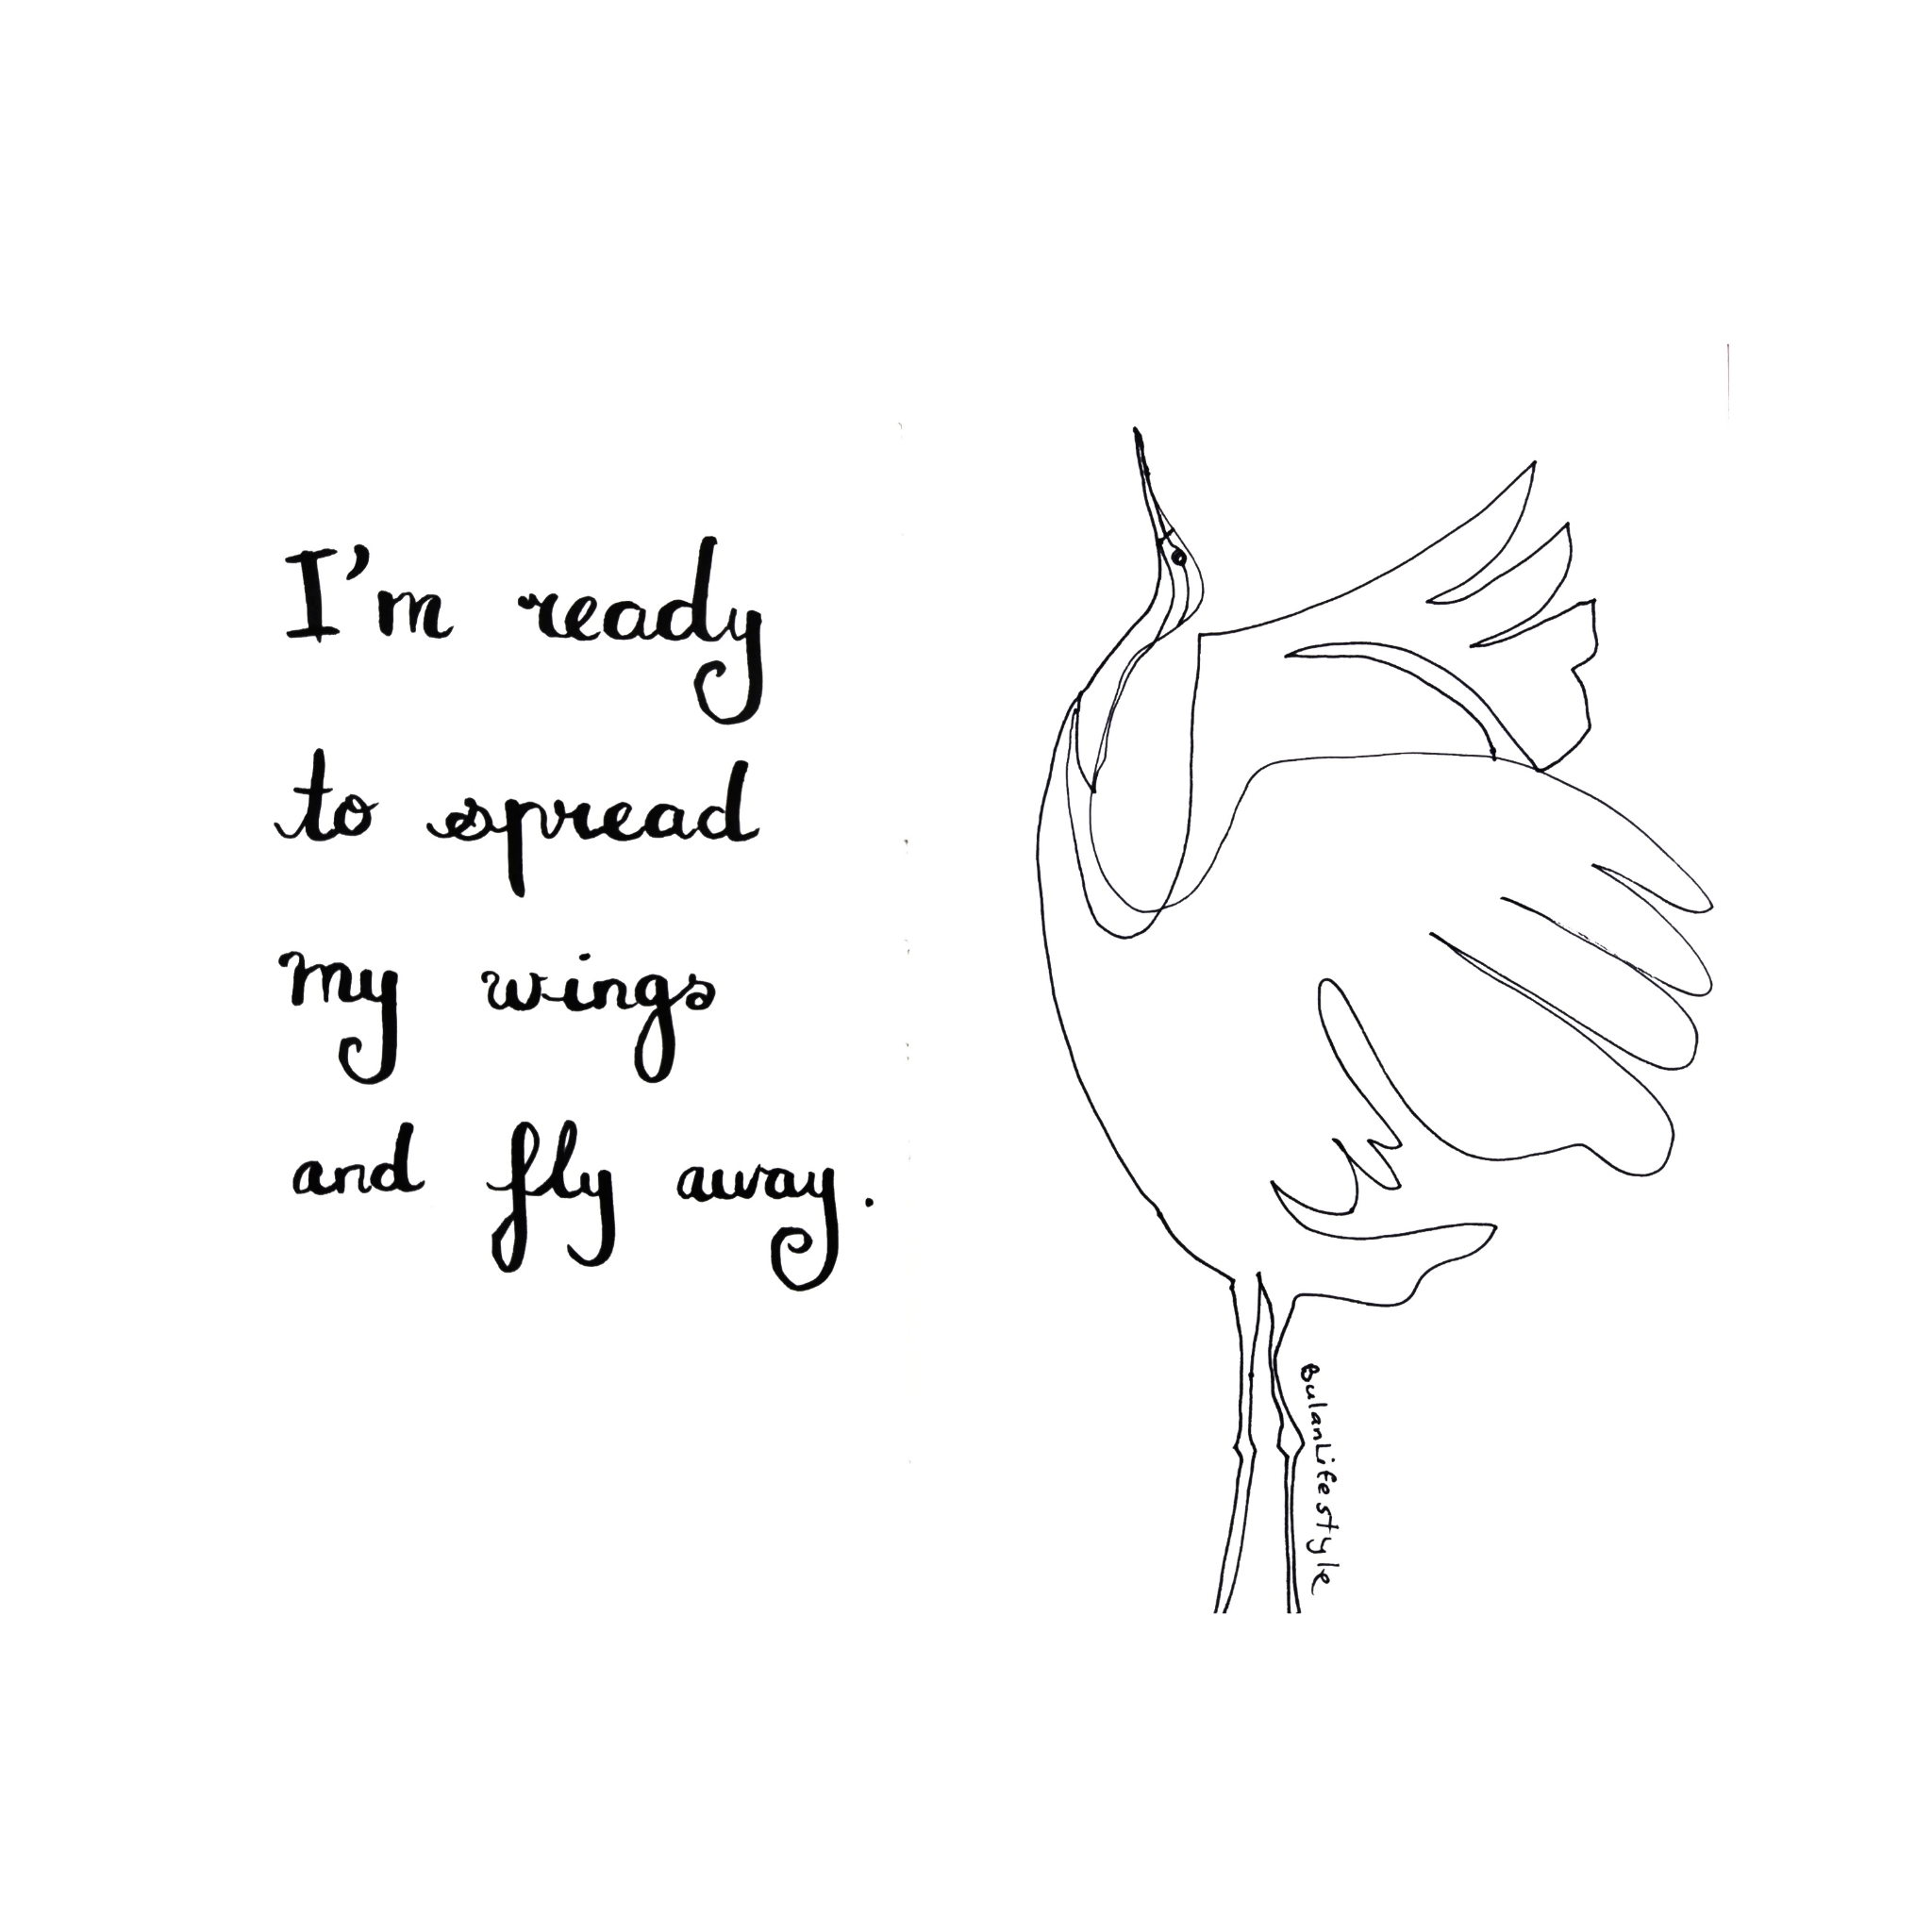 I’m ready to spread my wings and fly away